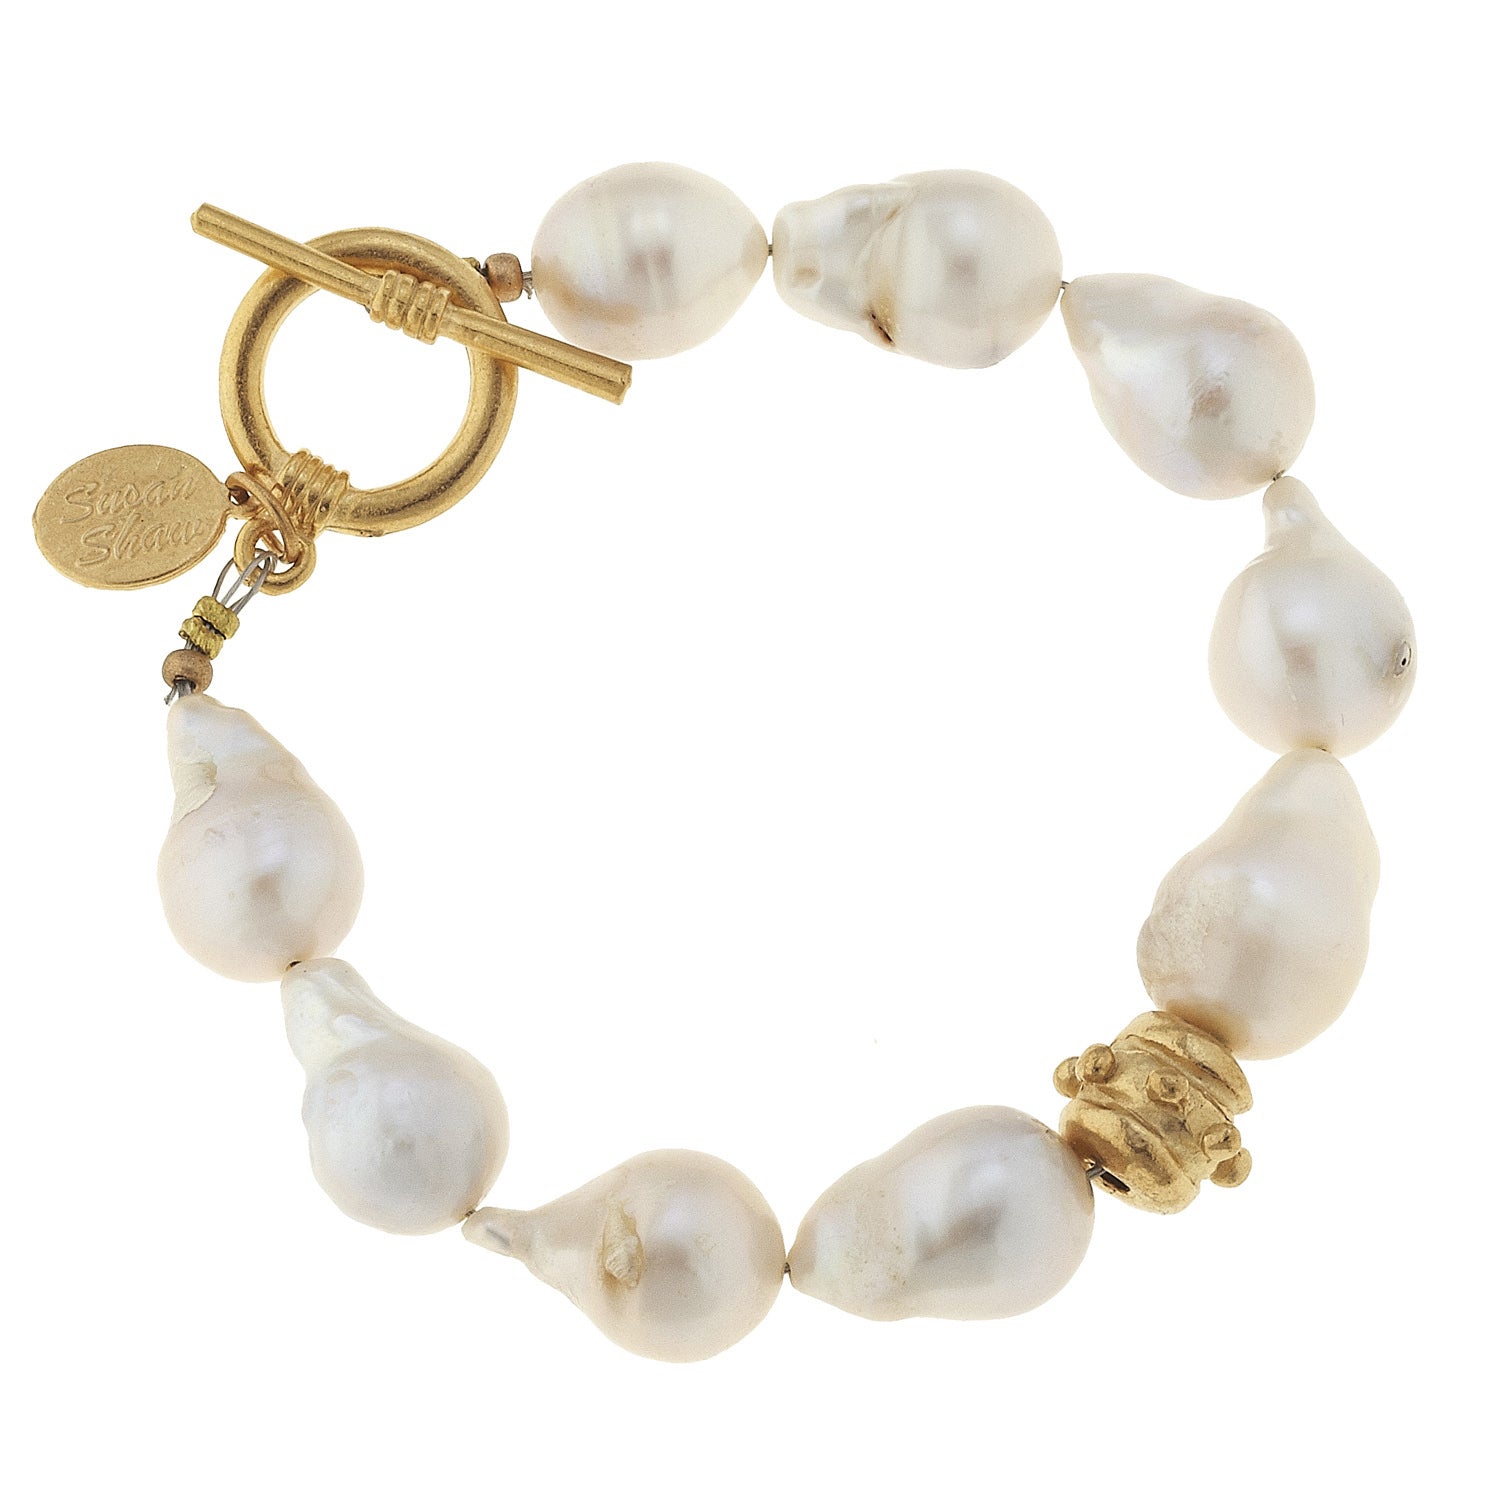 Susan Shaw Jewelry Pearl Bracelet, Large Baroque Freshwater Pearls in Gold